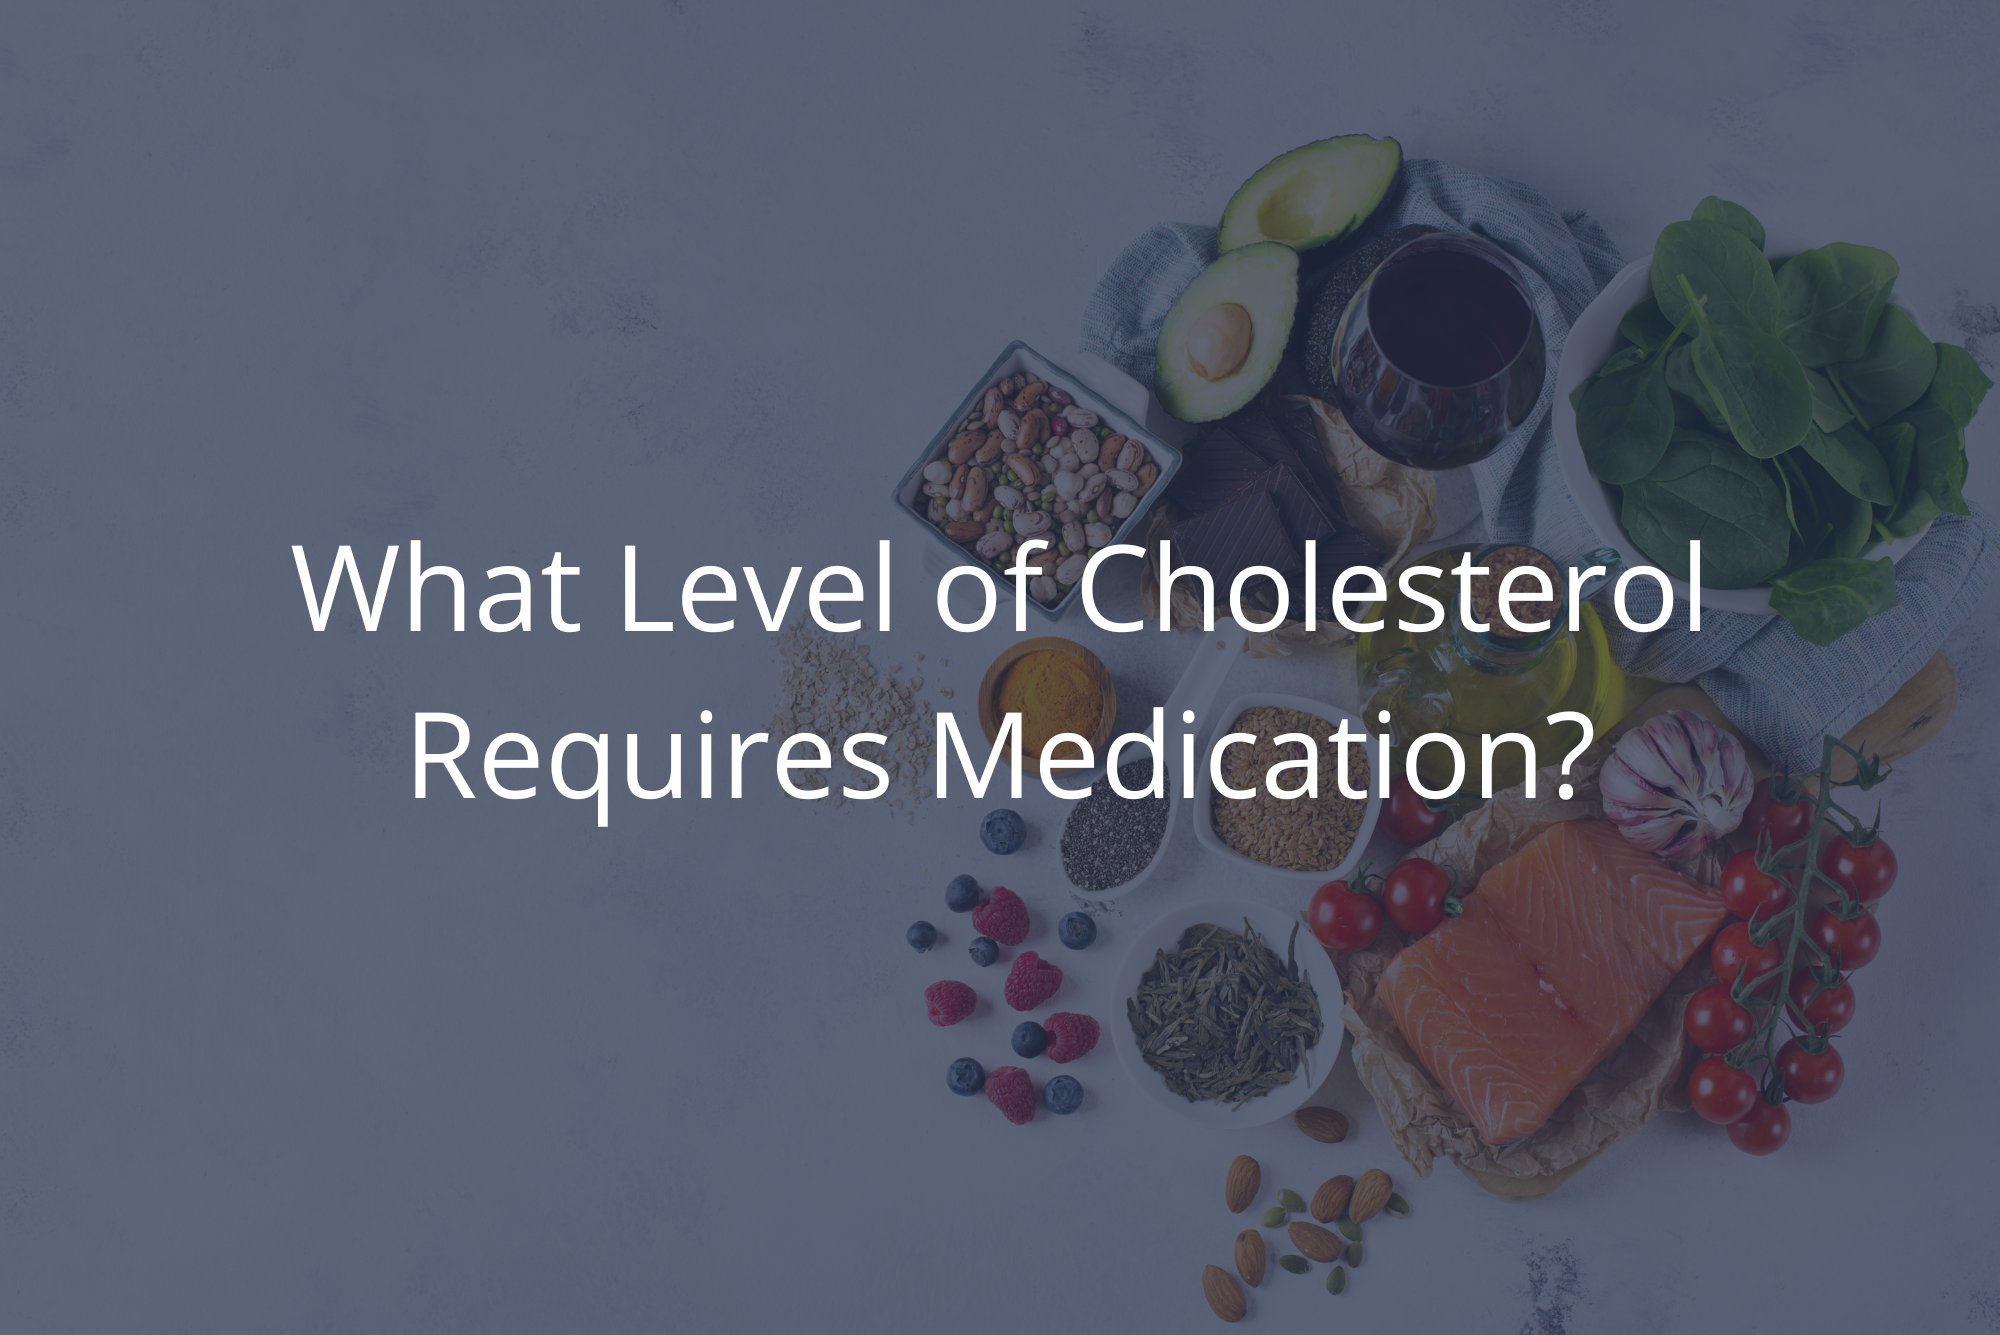 Various healthy foods that are good for people with high cholesterol are piled together on a marble countertop with overlay.